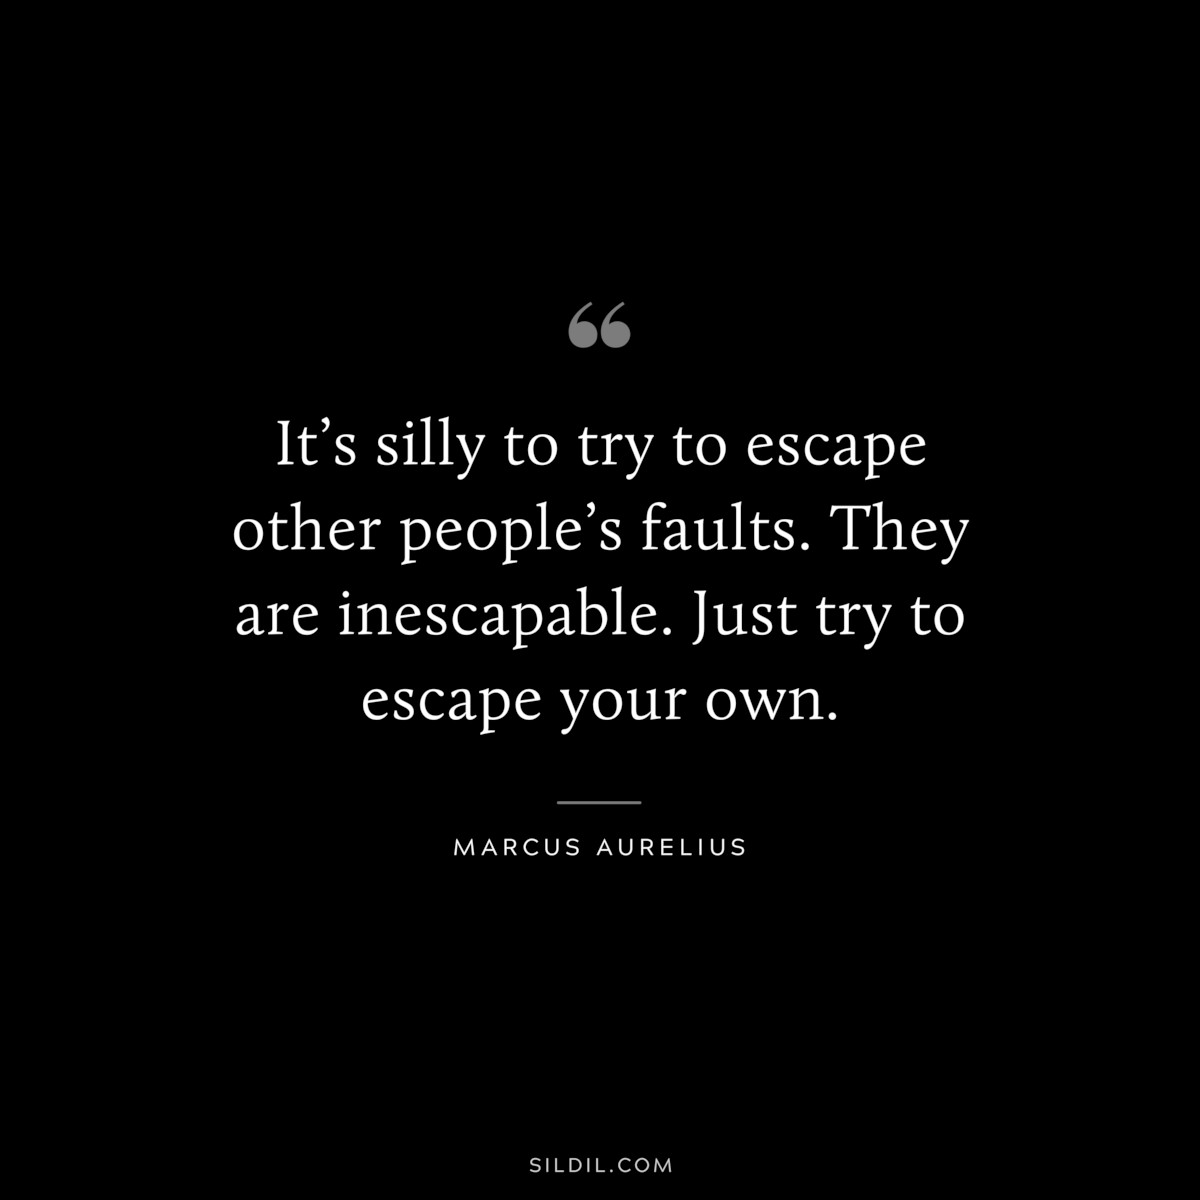 It’s silly to try to escape other people’s faults. They are inescapable. Just try to escape your own. ― Marcus Aurelius